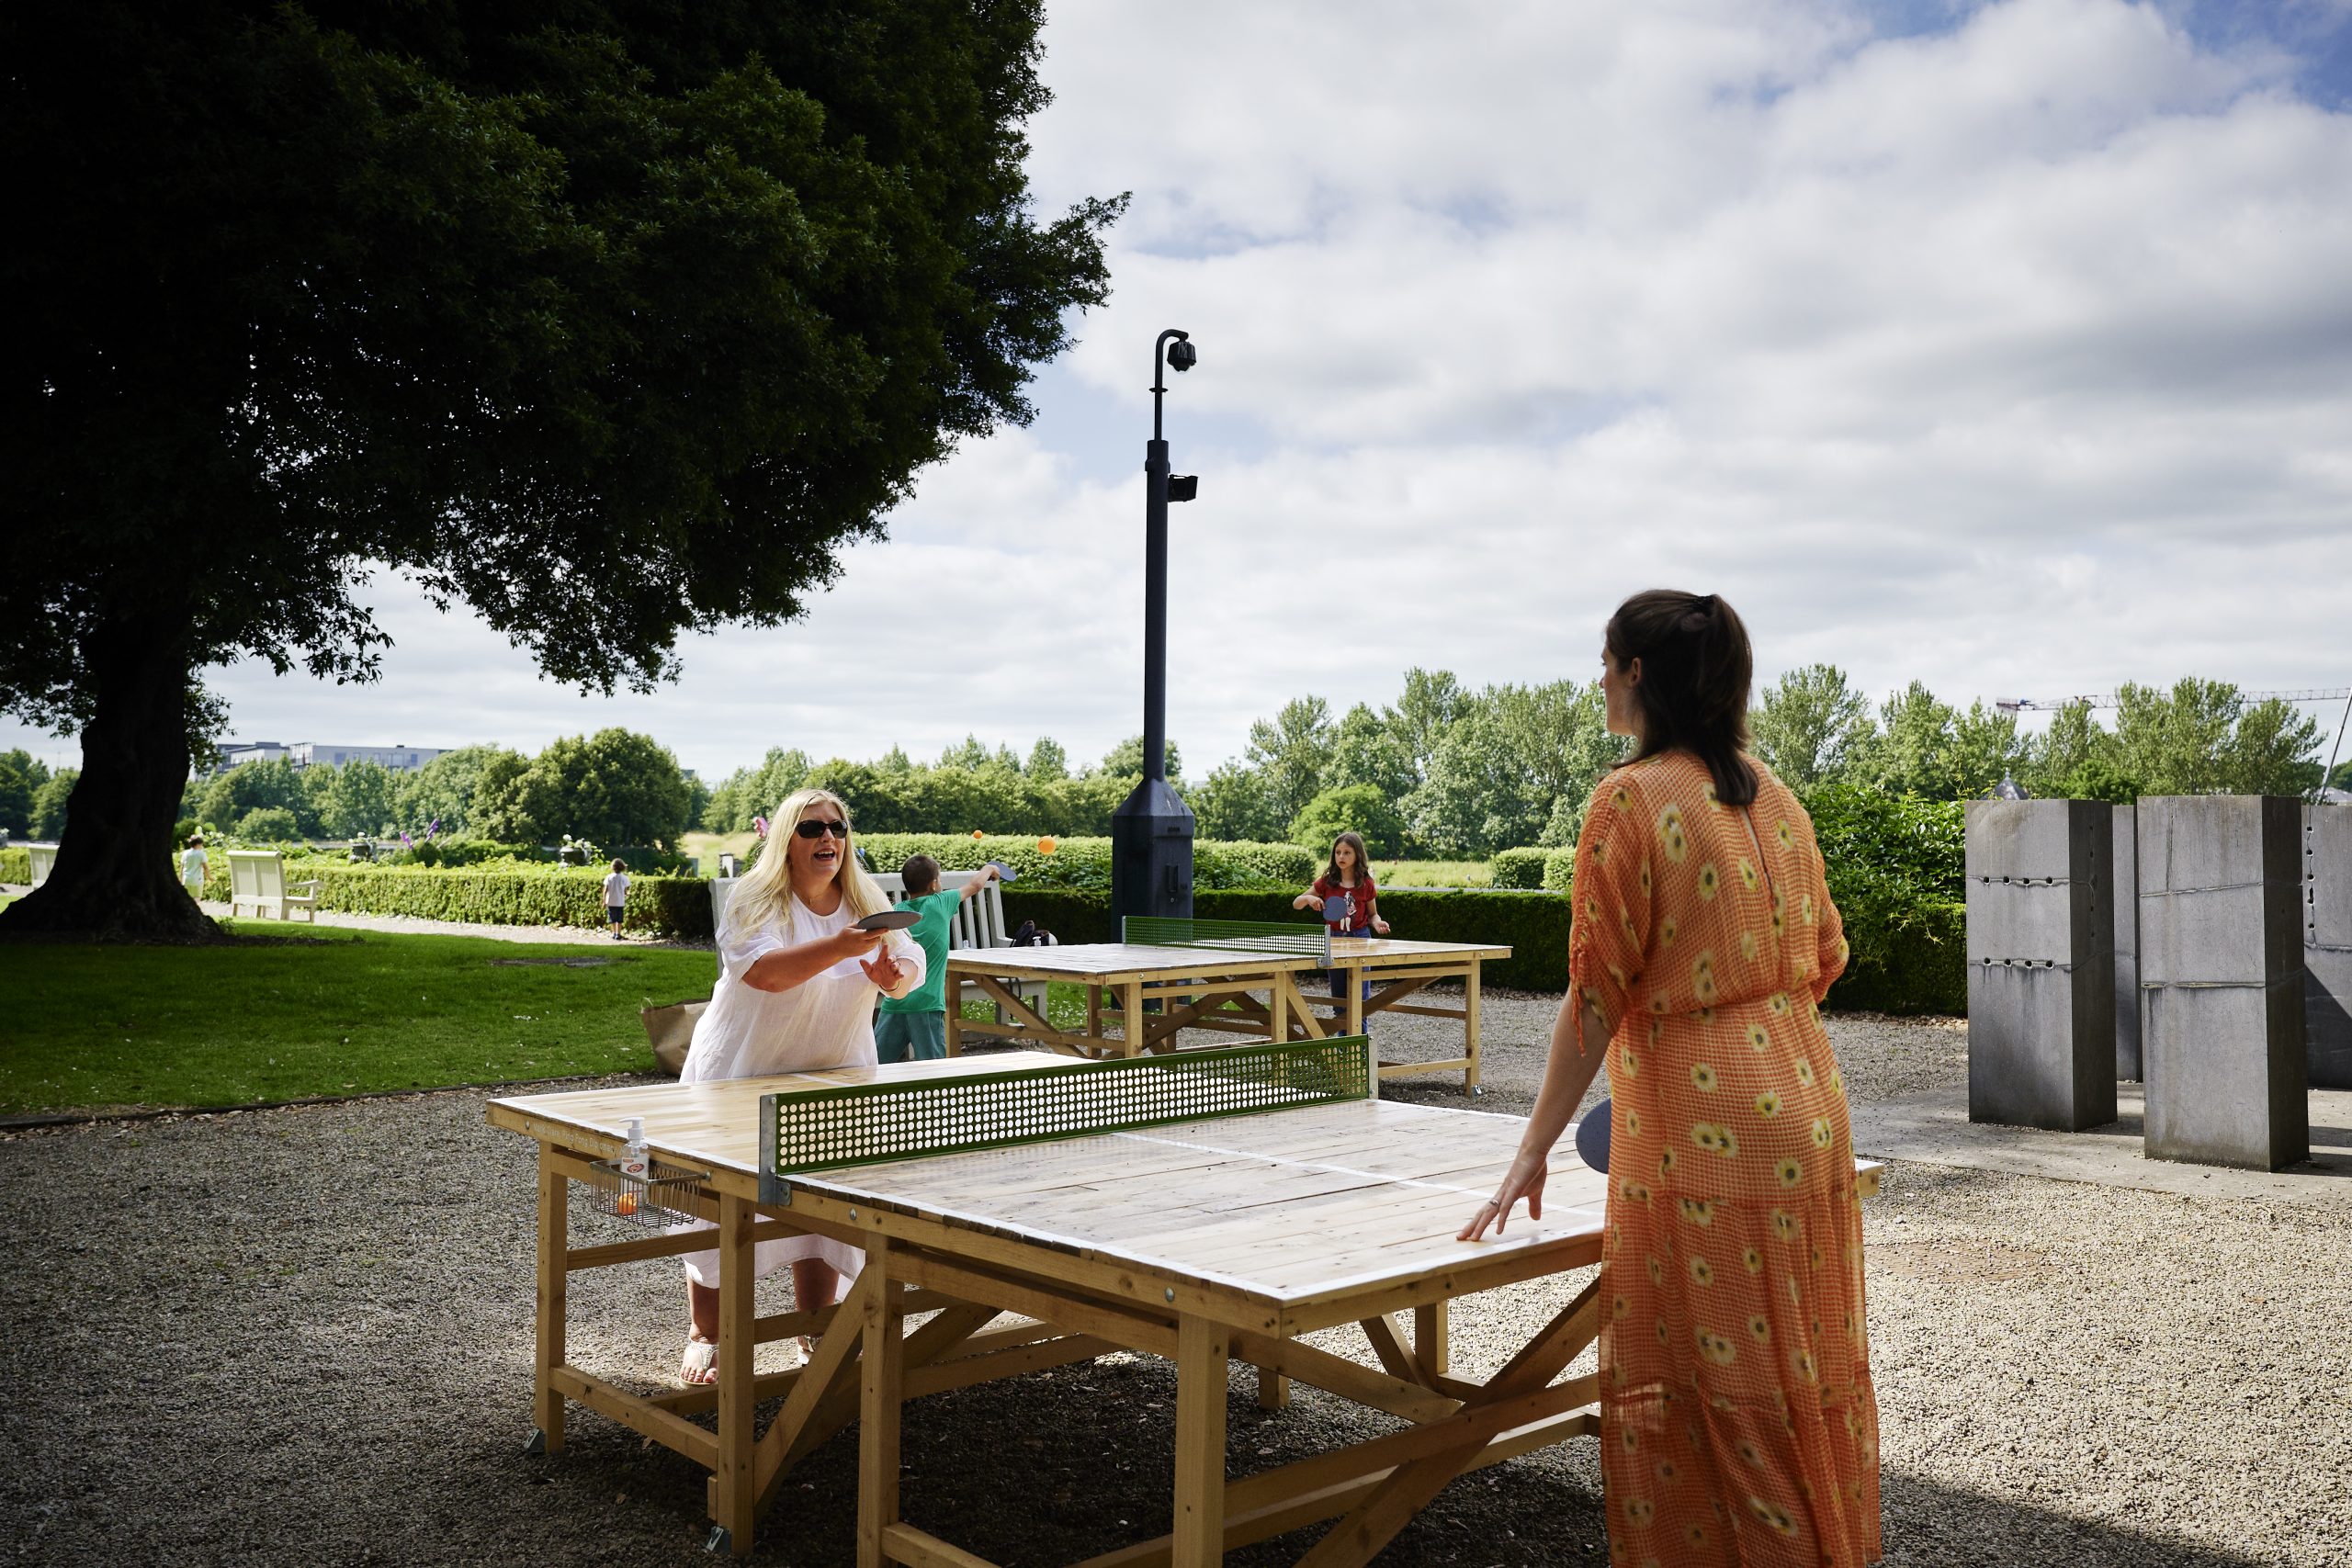 Photograph of two women playing on a wooden outdoor table tennis table.